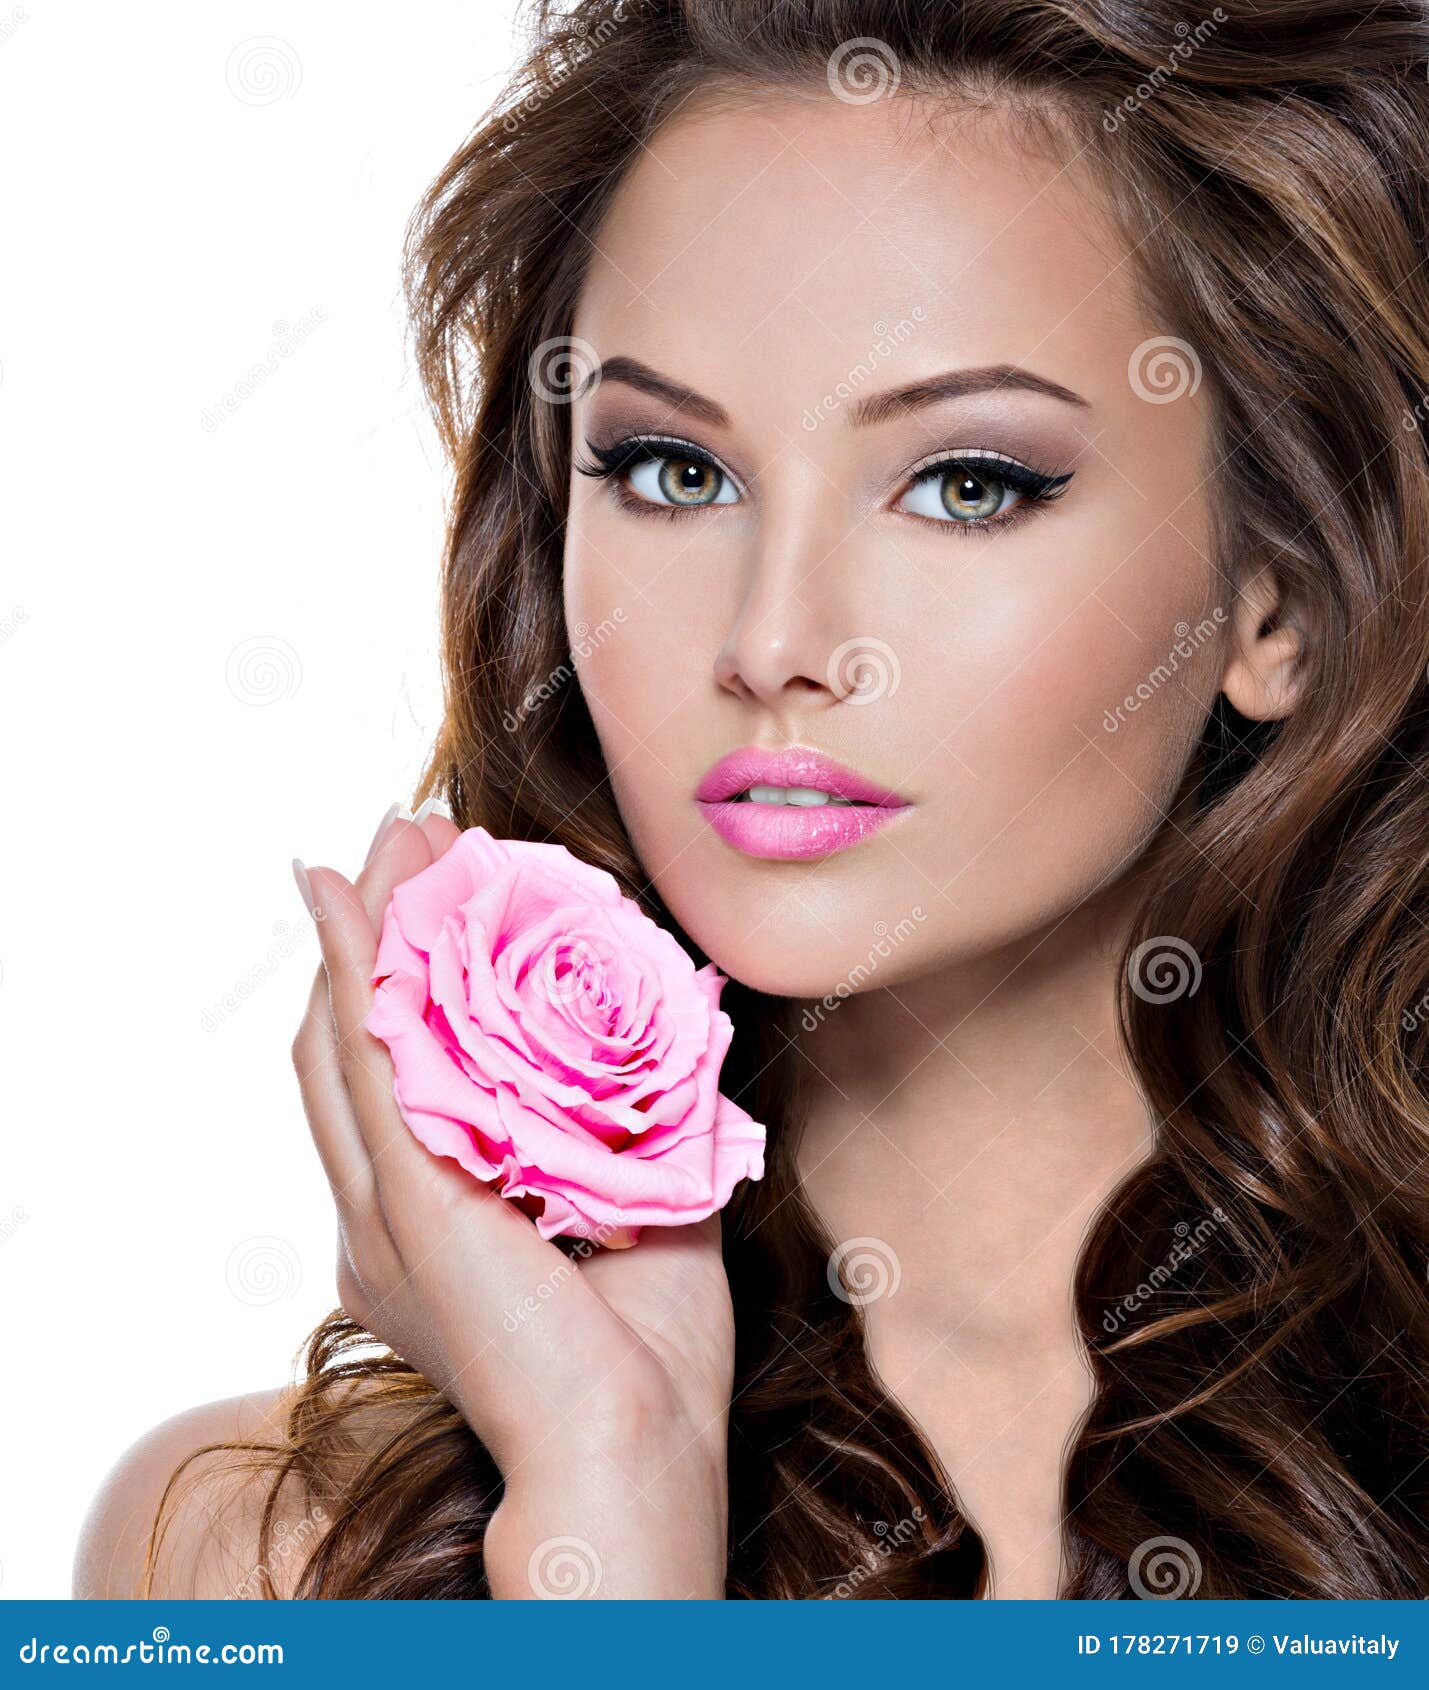 Face Of A Beautiful Woman With Long Brown Hairs And Pink Flower Stock